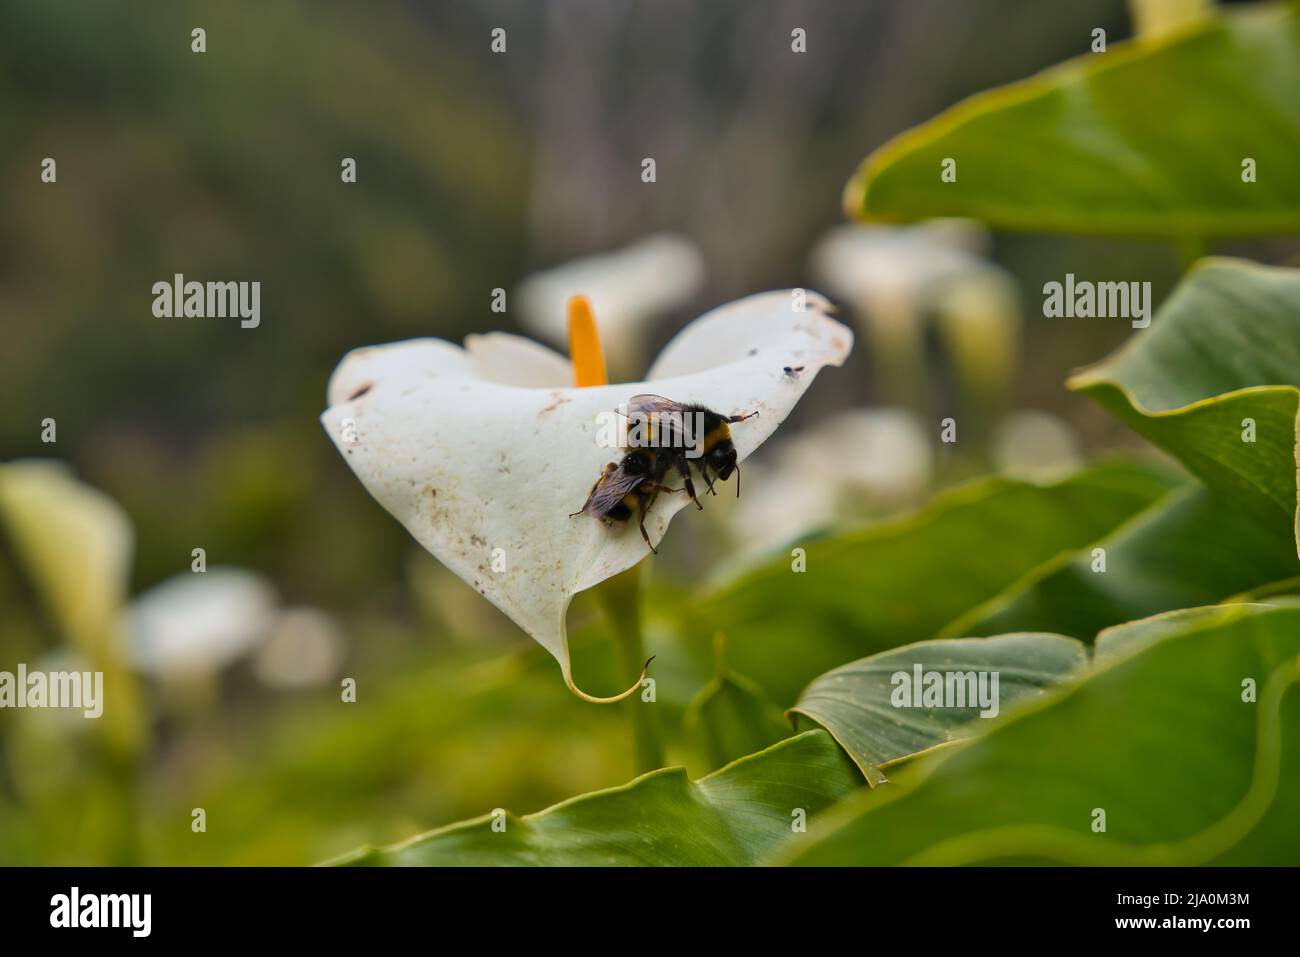 Wild calla lily flower with two bumble bees pollinating it, growing on Madeira, Portugal Stock Photo